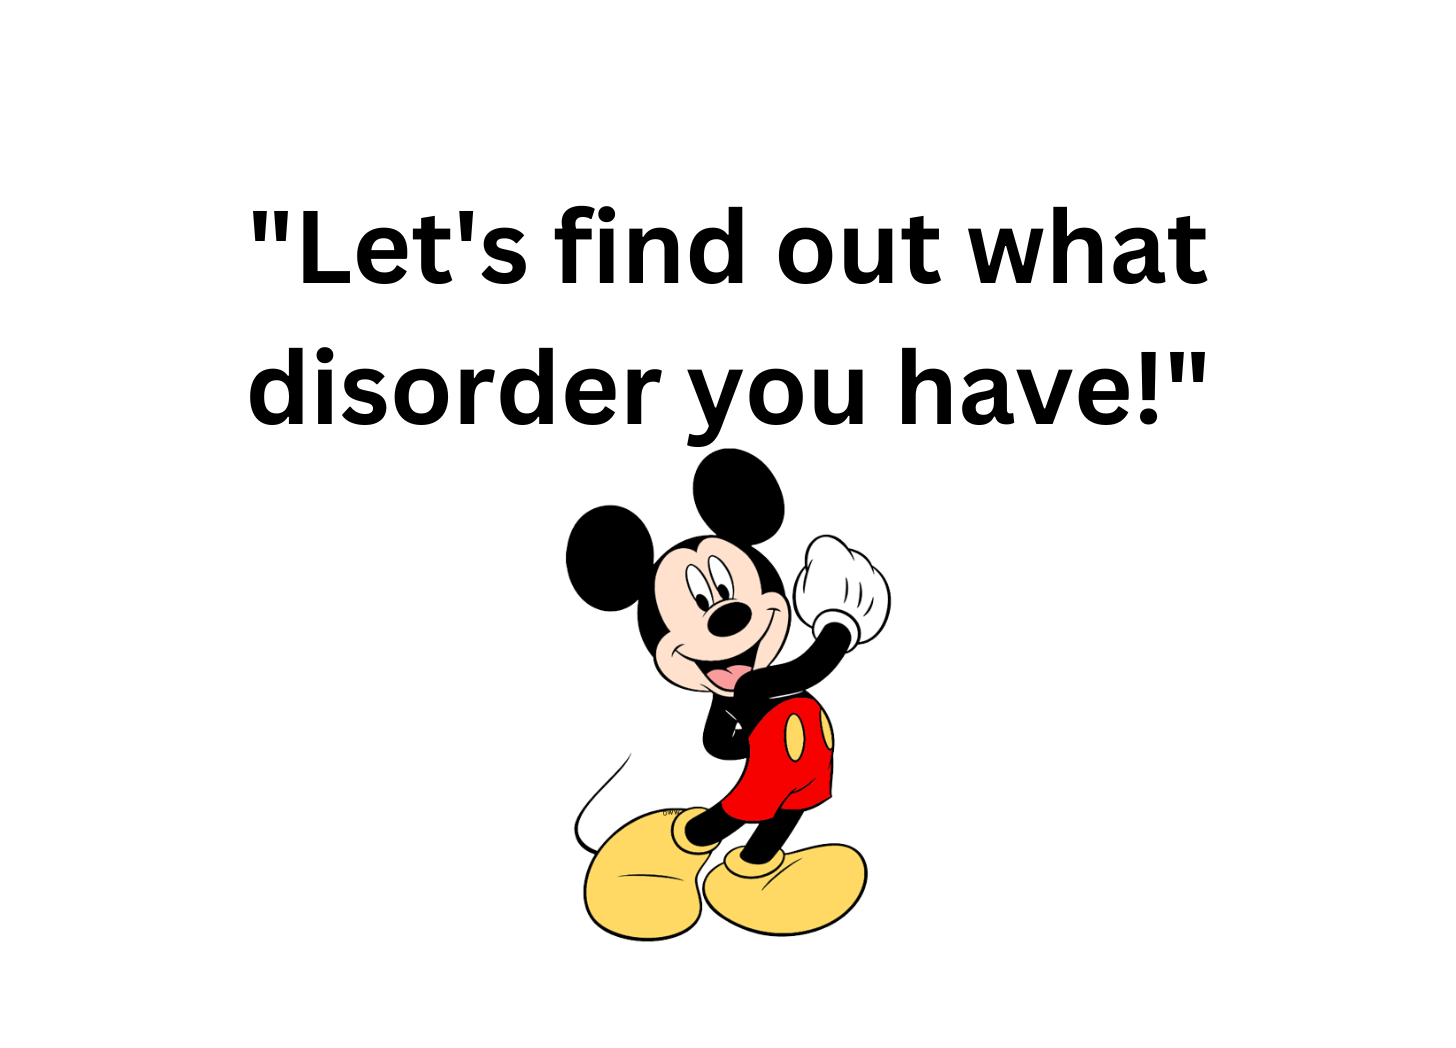 Text reads, "Let's find out what disorder you have!" Image is a super excited Mickey Mouse.